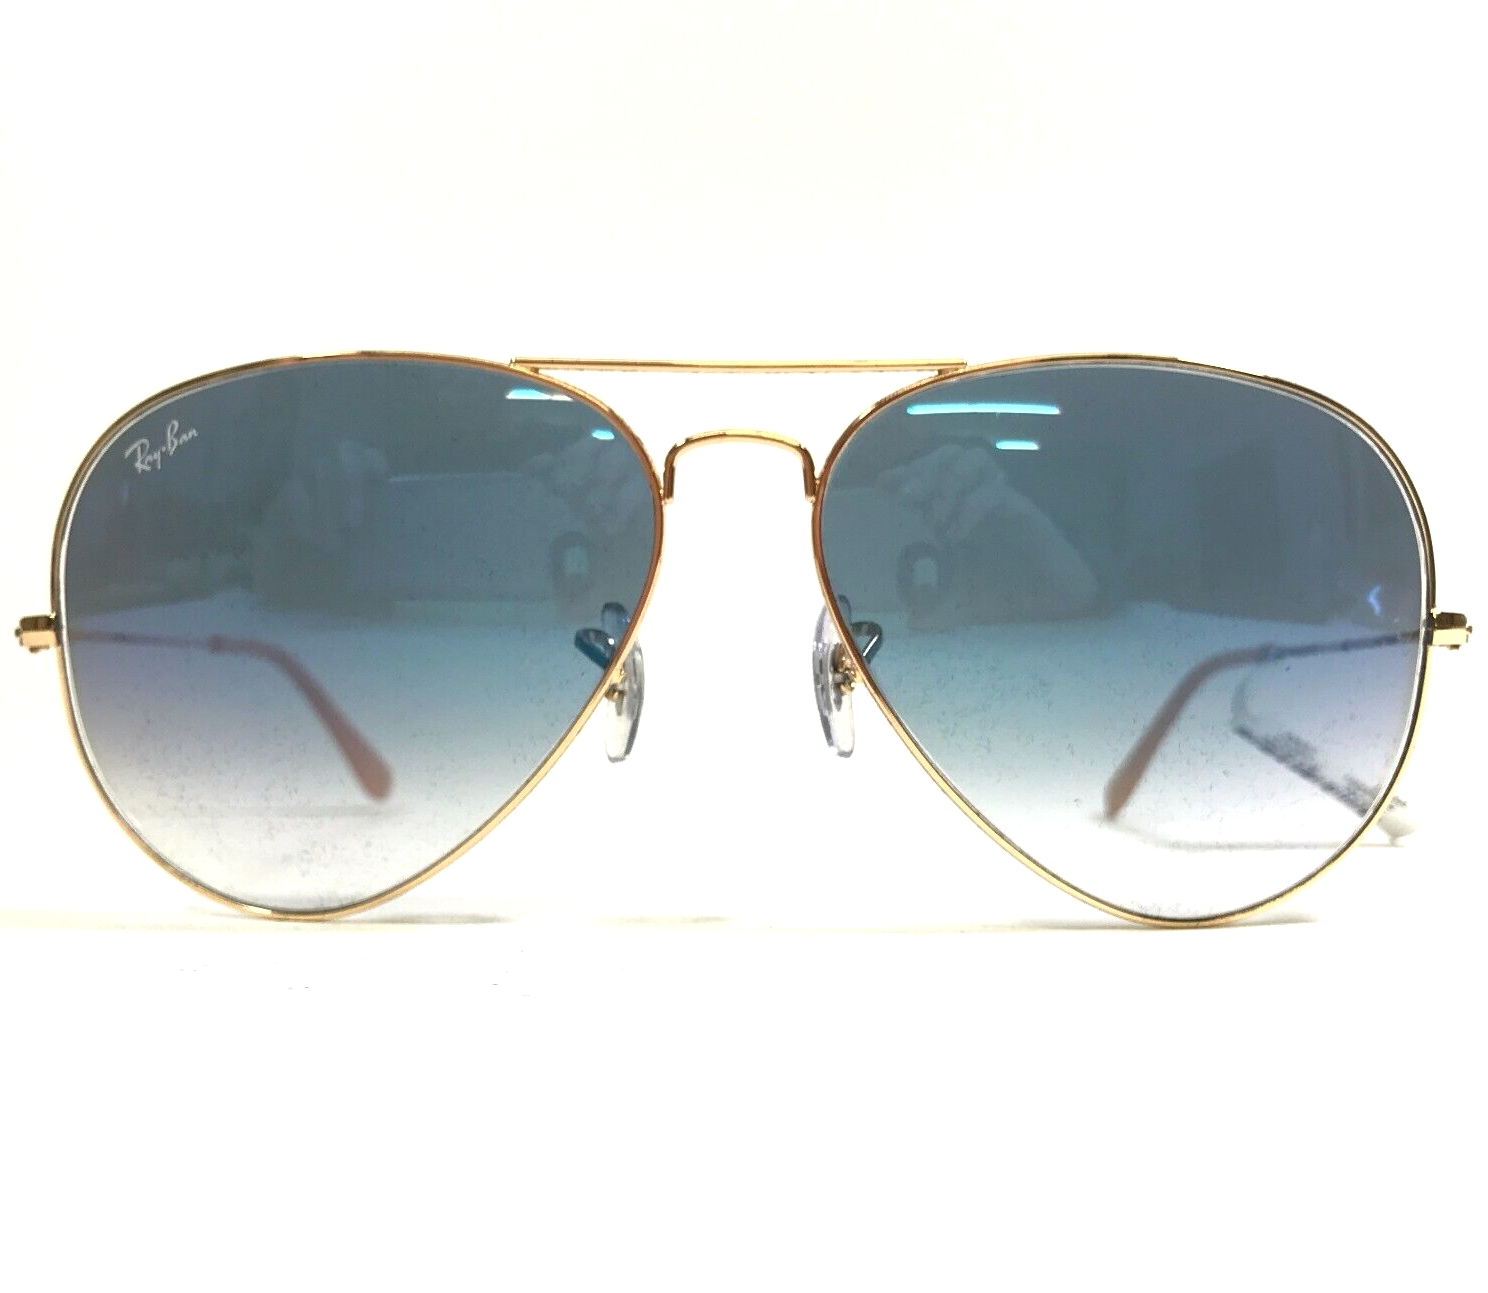 Ray-Ban Sunglasses RB3025 AVIATOR LARGE METAL 001/3F Shiny Gold with Blue Lenses - $126.01